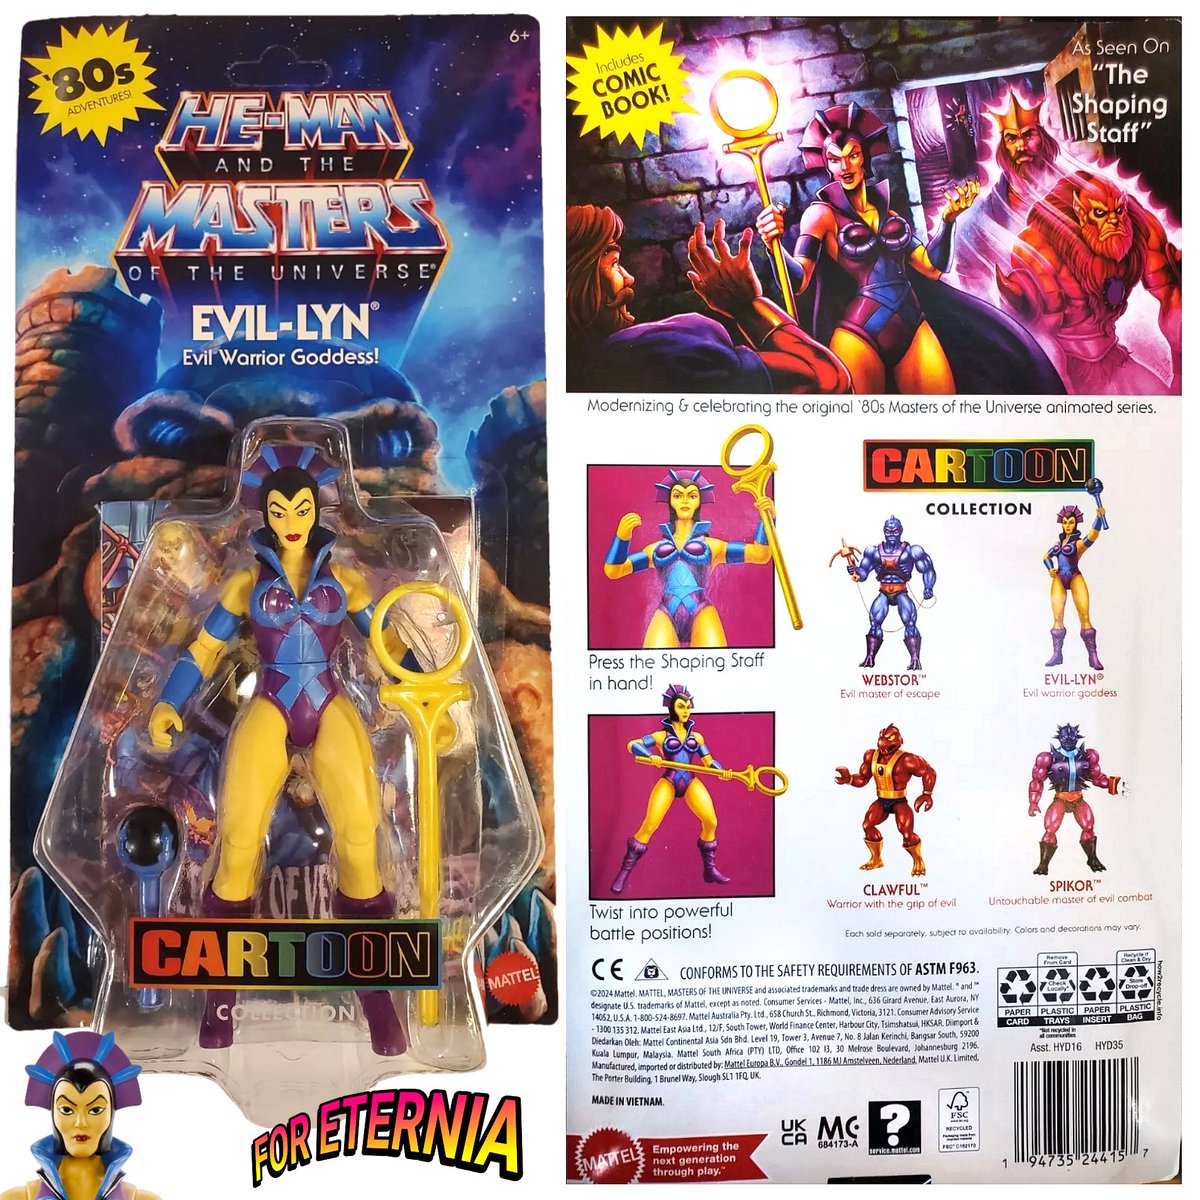 Full packaging reveal for the upcoming Masters of the Universe: Origins “Cartoon Collection ” Evil-Lyn figure! #MastersoftheUniverse #MOTU #MOTUOrigins #CartoonCollection